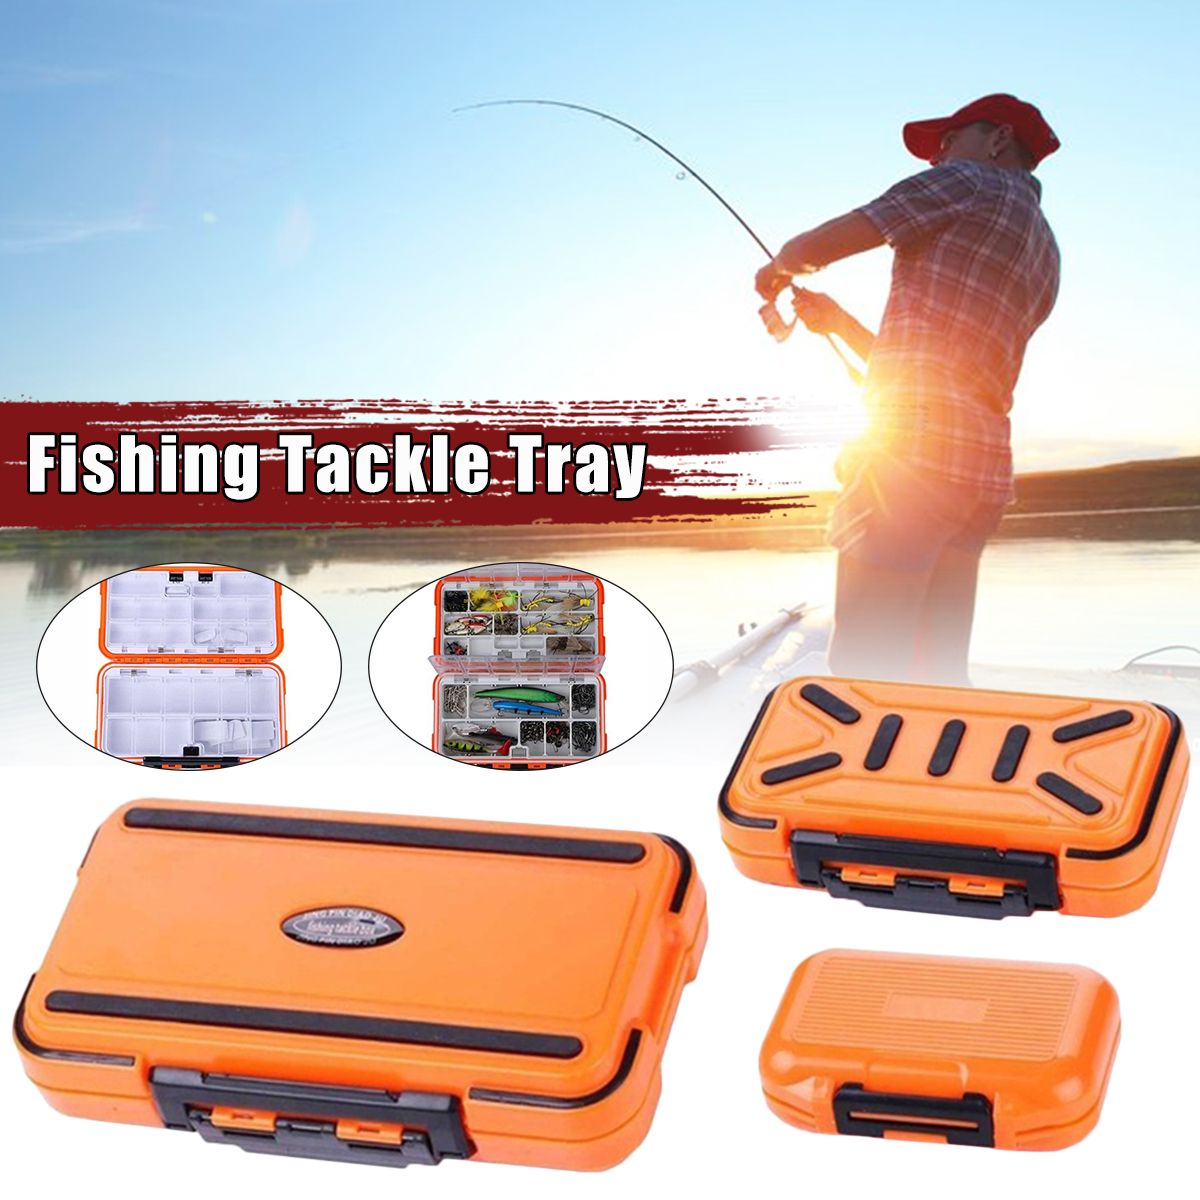 Sealed-Waterproof-Fishing-Tackle-Tray-ABS-Plastic-Fishing-Accessories-Box-Swivel-Snap-Lure--Parts-St-1634862-2